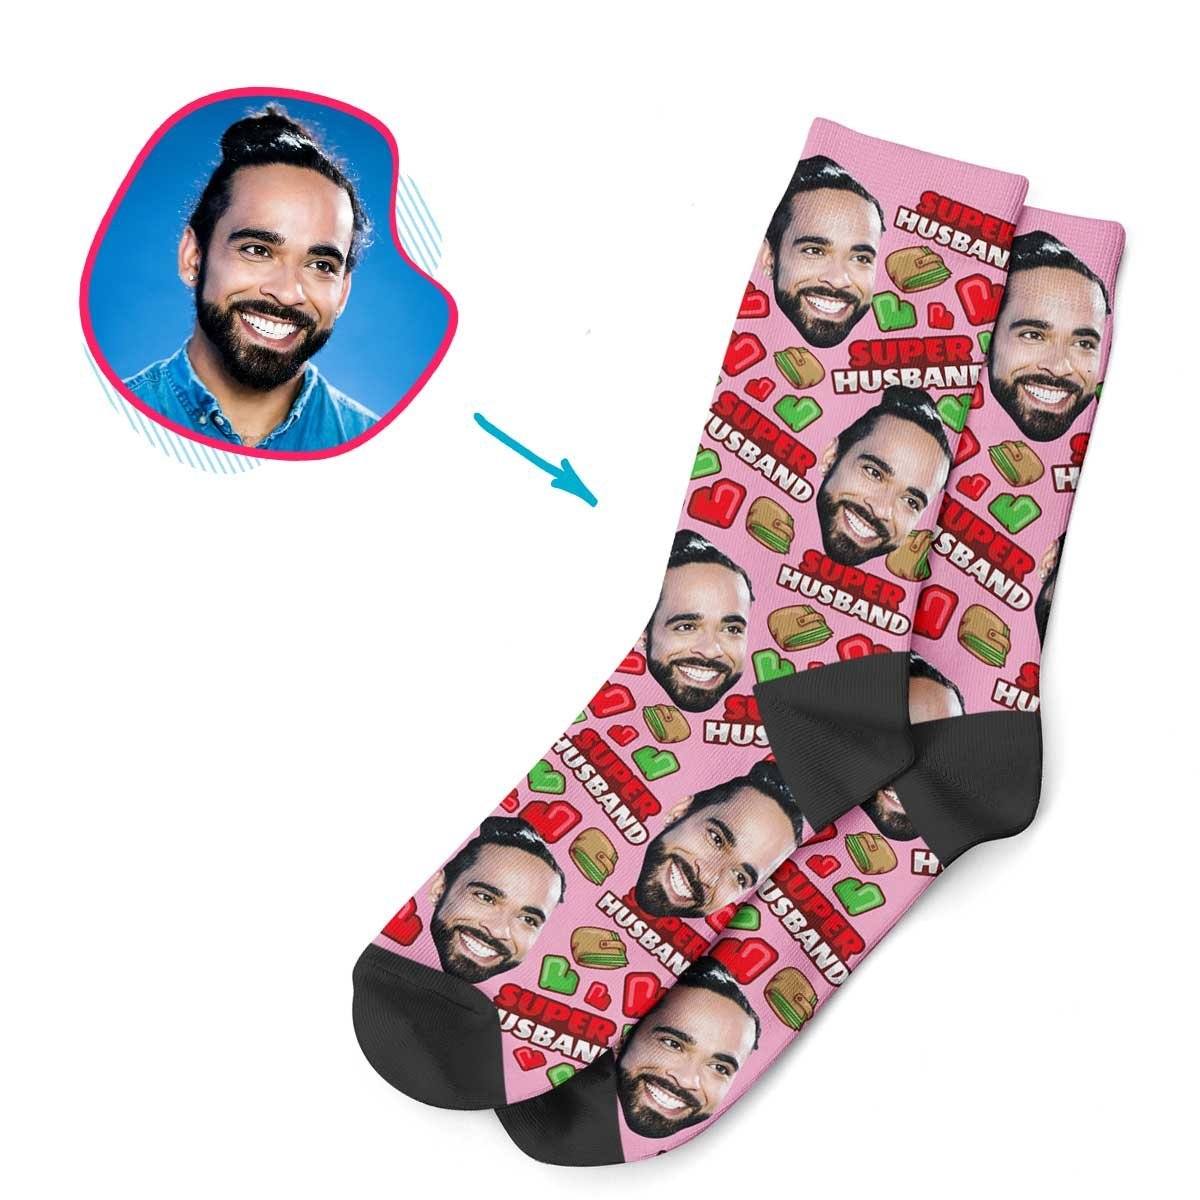 Pink Husband personalized socks with photo of face printed on them